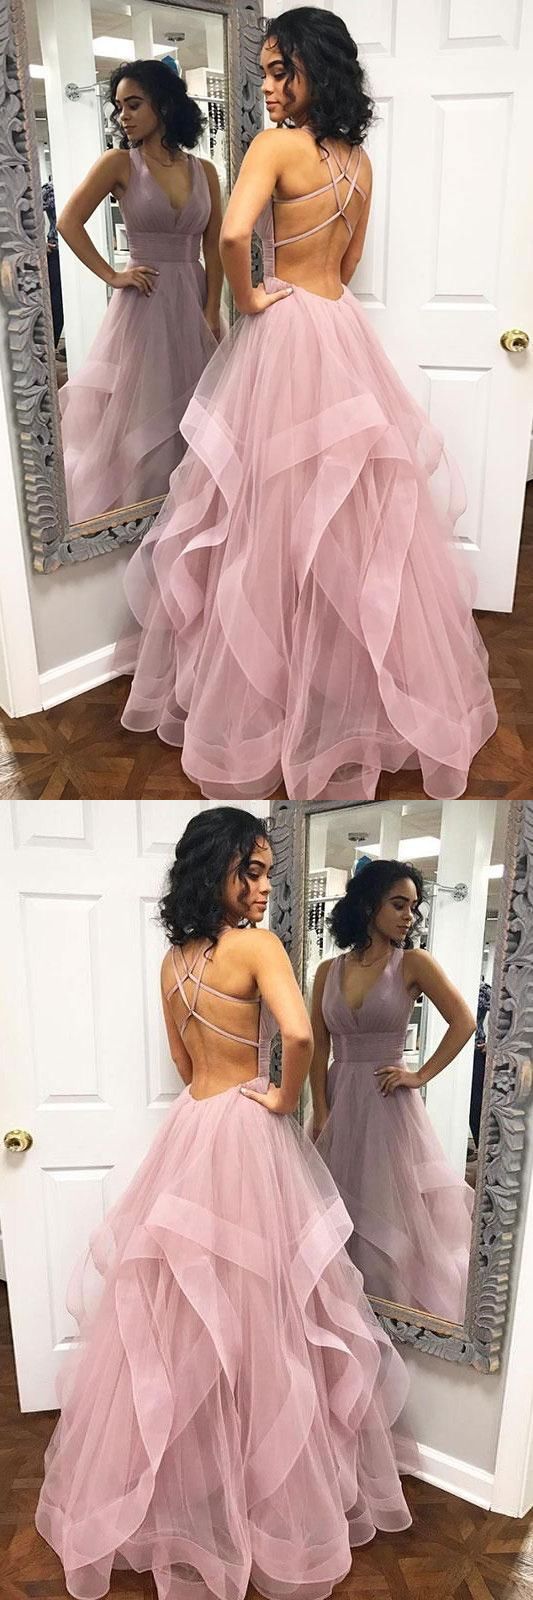 Backless Pale Pink Ball Gown Ruffle Tulle Bottom Prom Gown